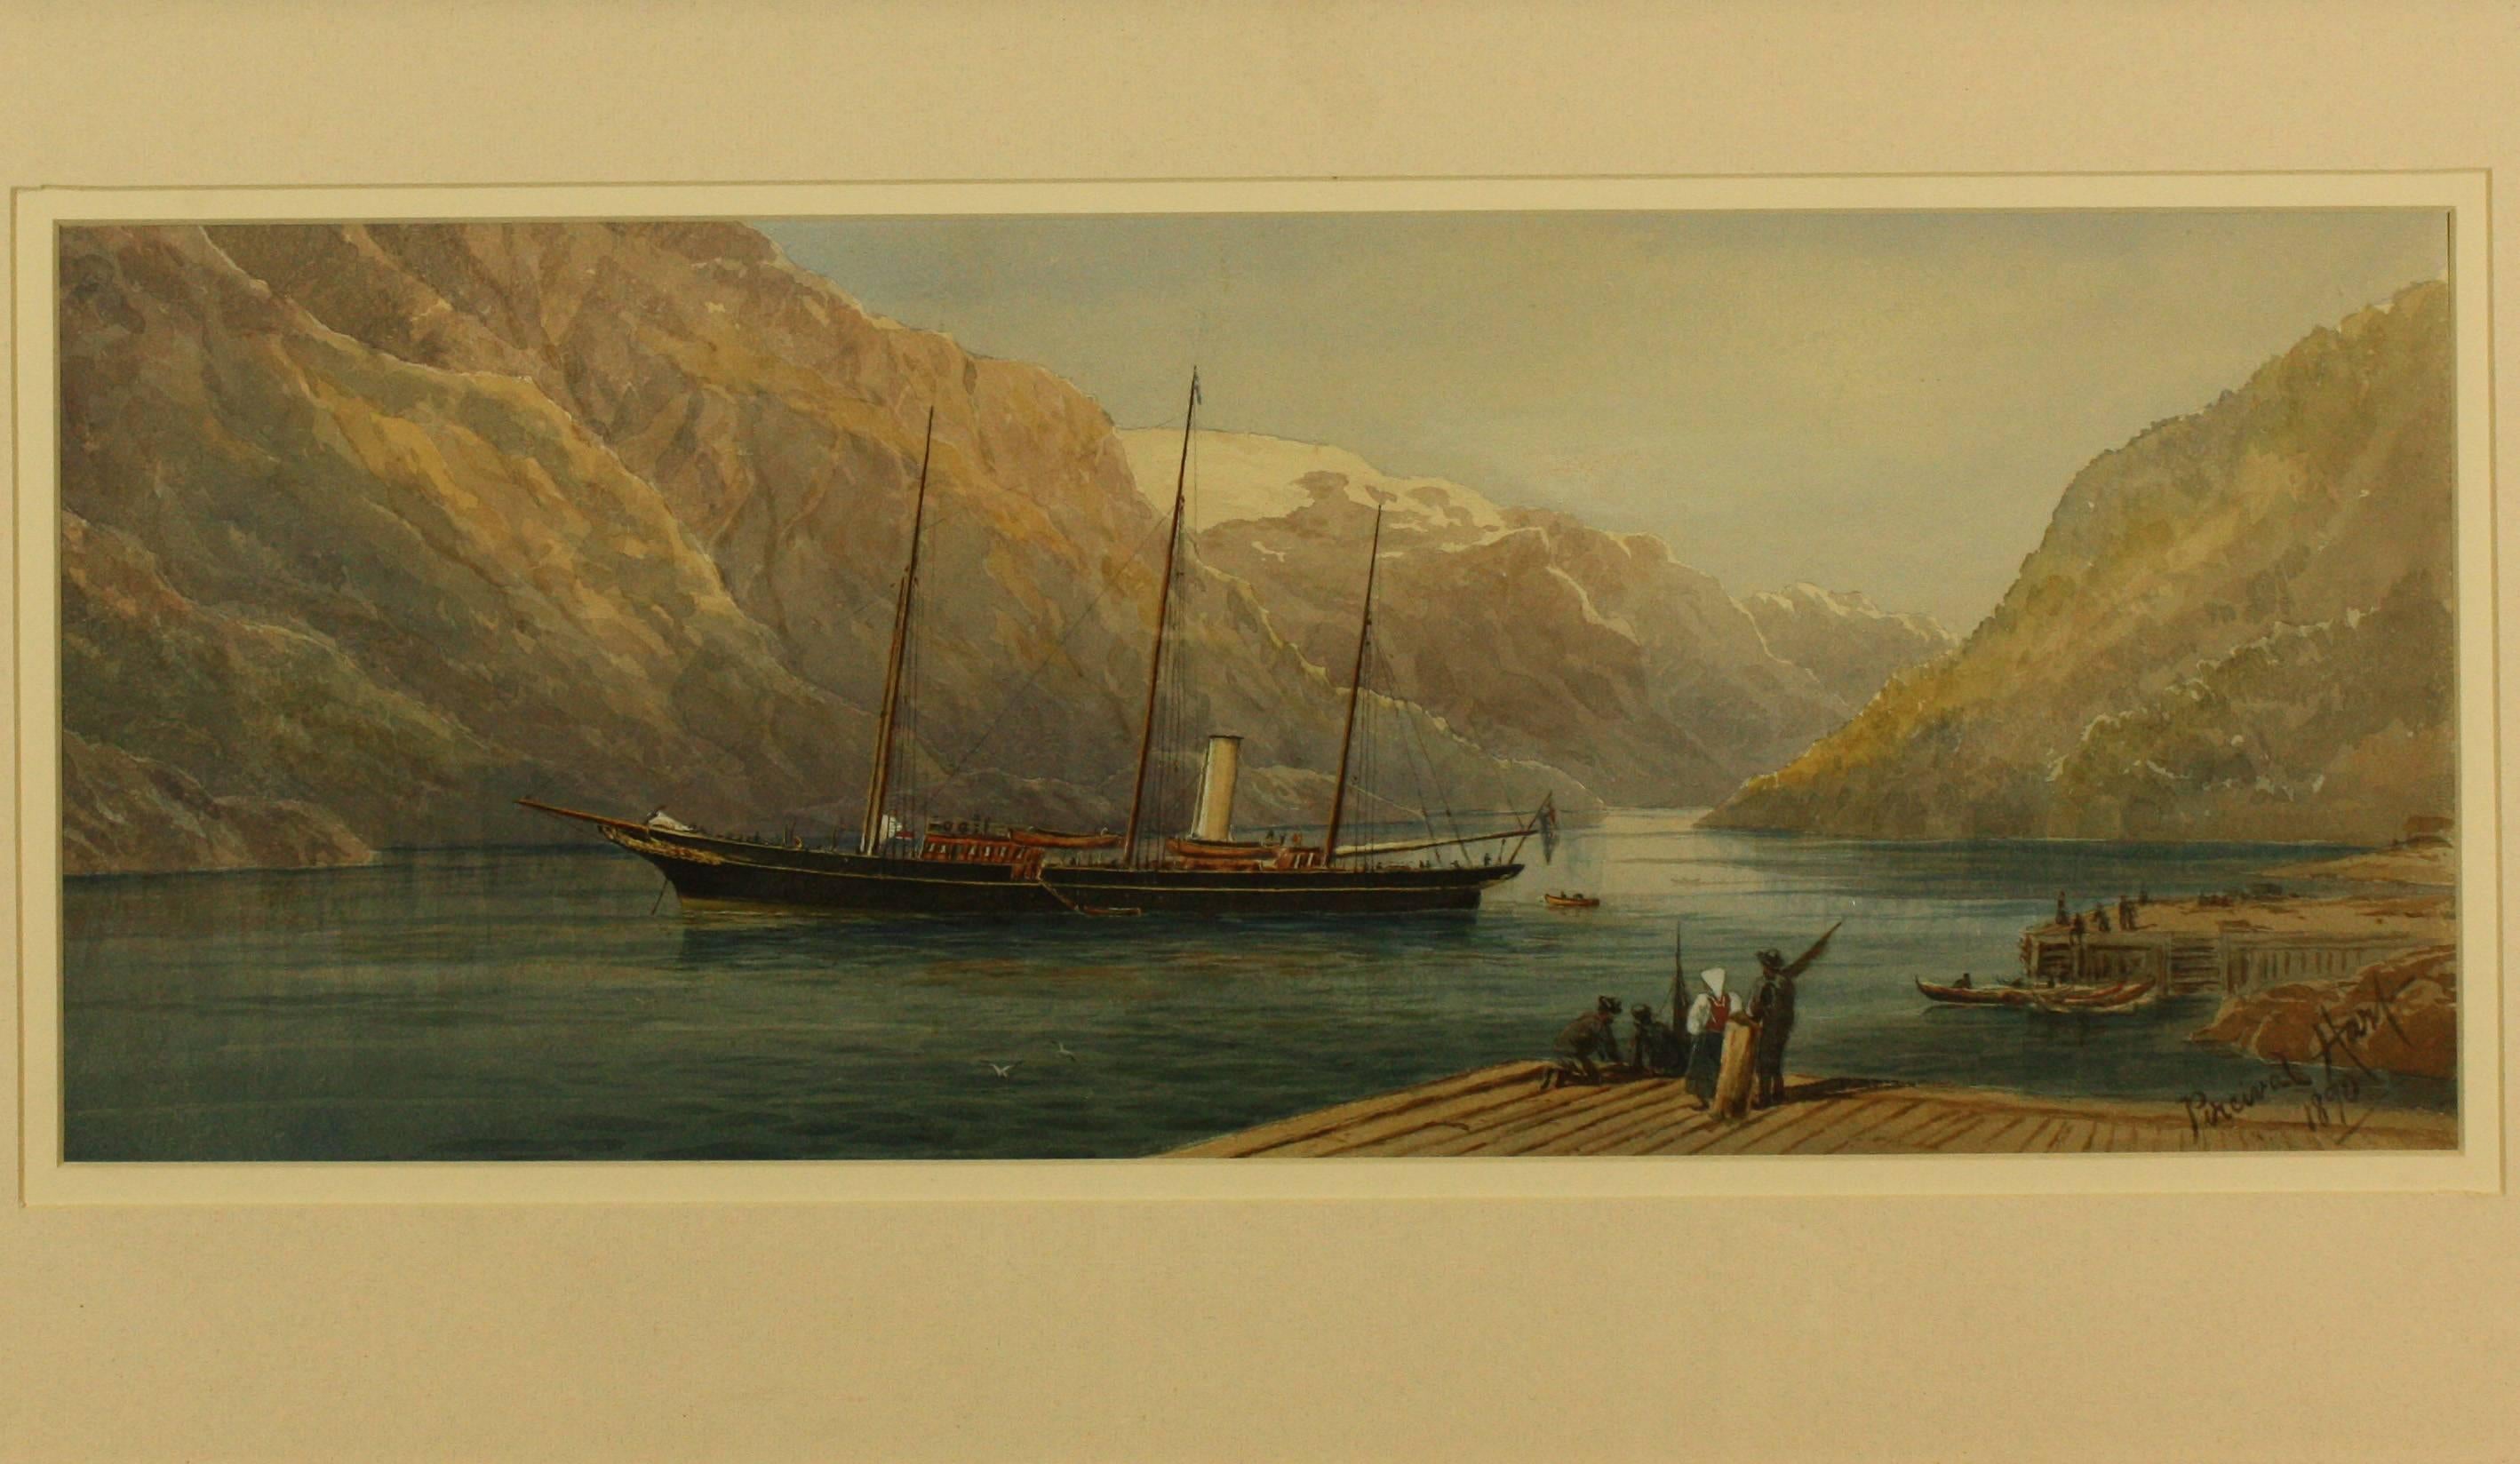 Boat on the Hardanger Fjord at Odda, Norway by Horace Percival Hart  For Sale 1